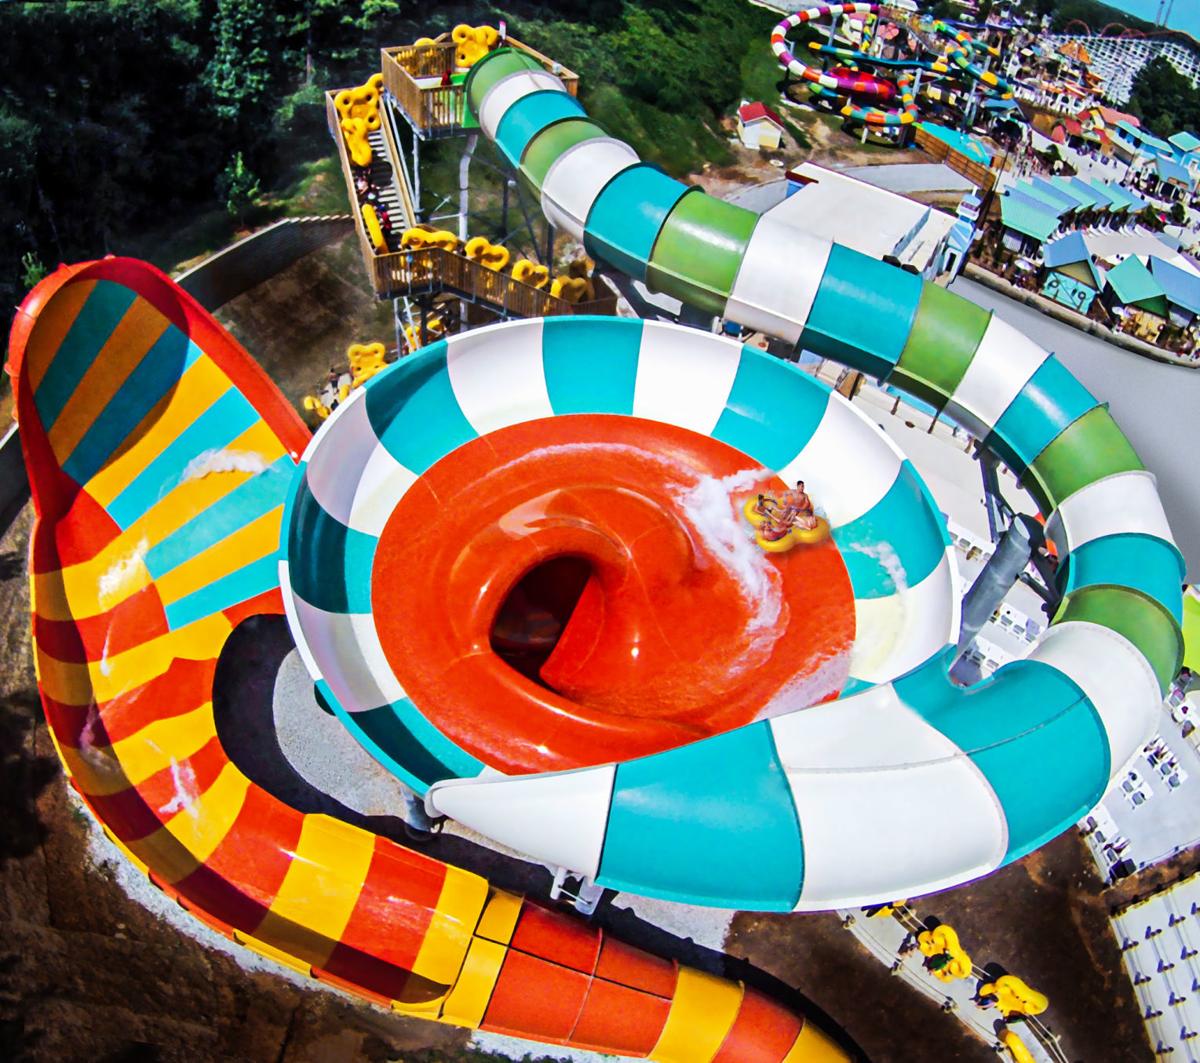 Water slide injury at Six Flags St. Louis highlights lax regulation | Political Fix | www.waterandnature.org